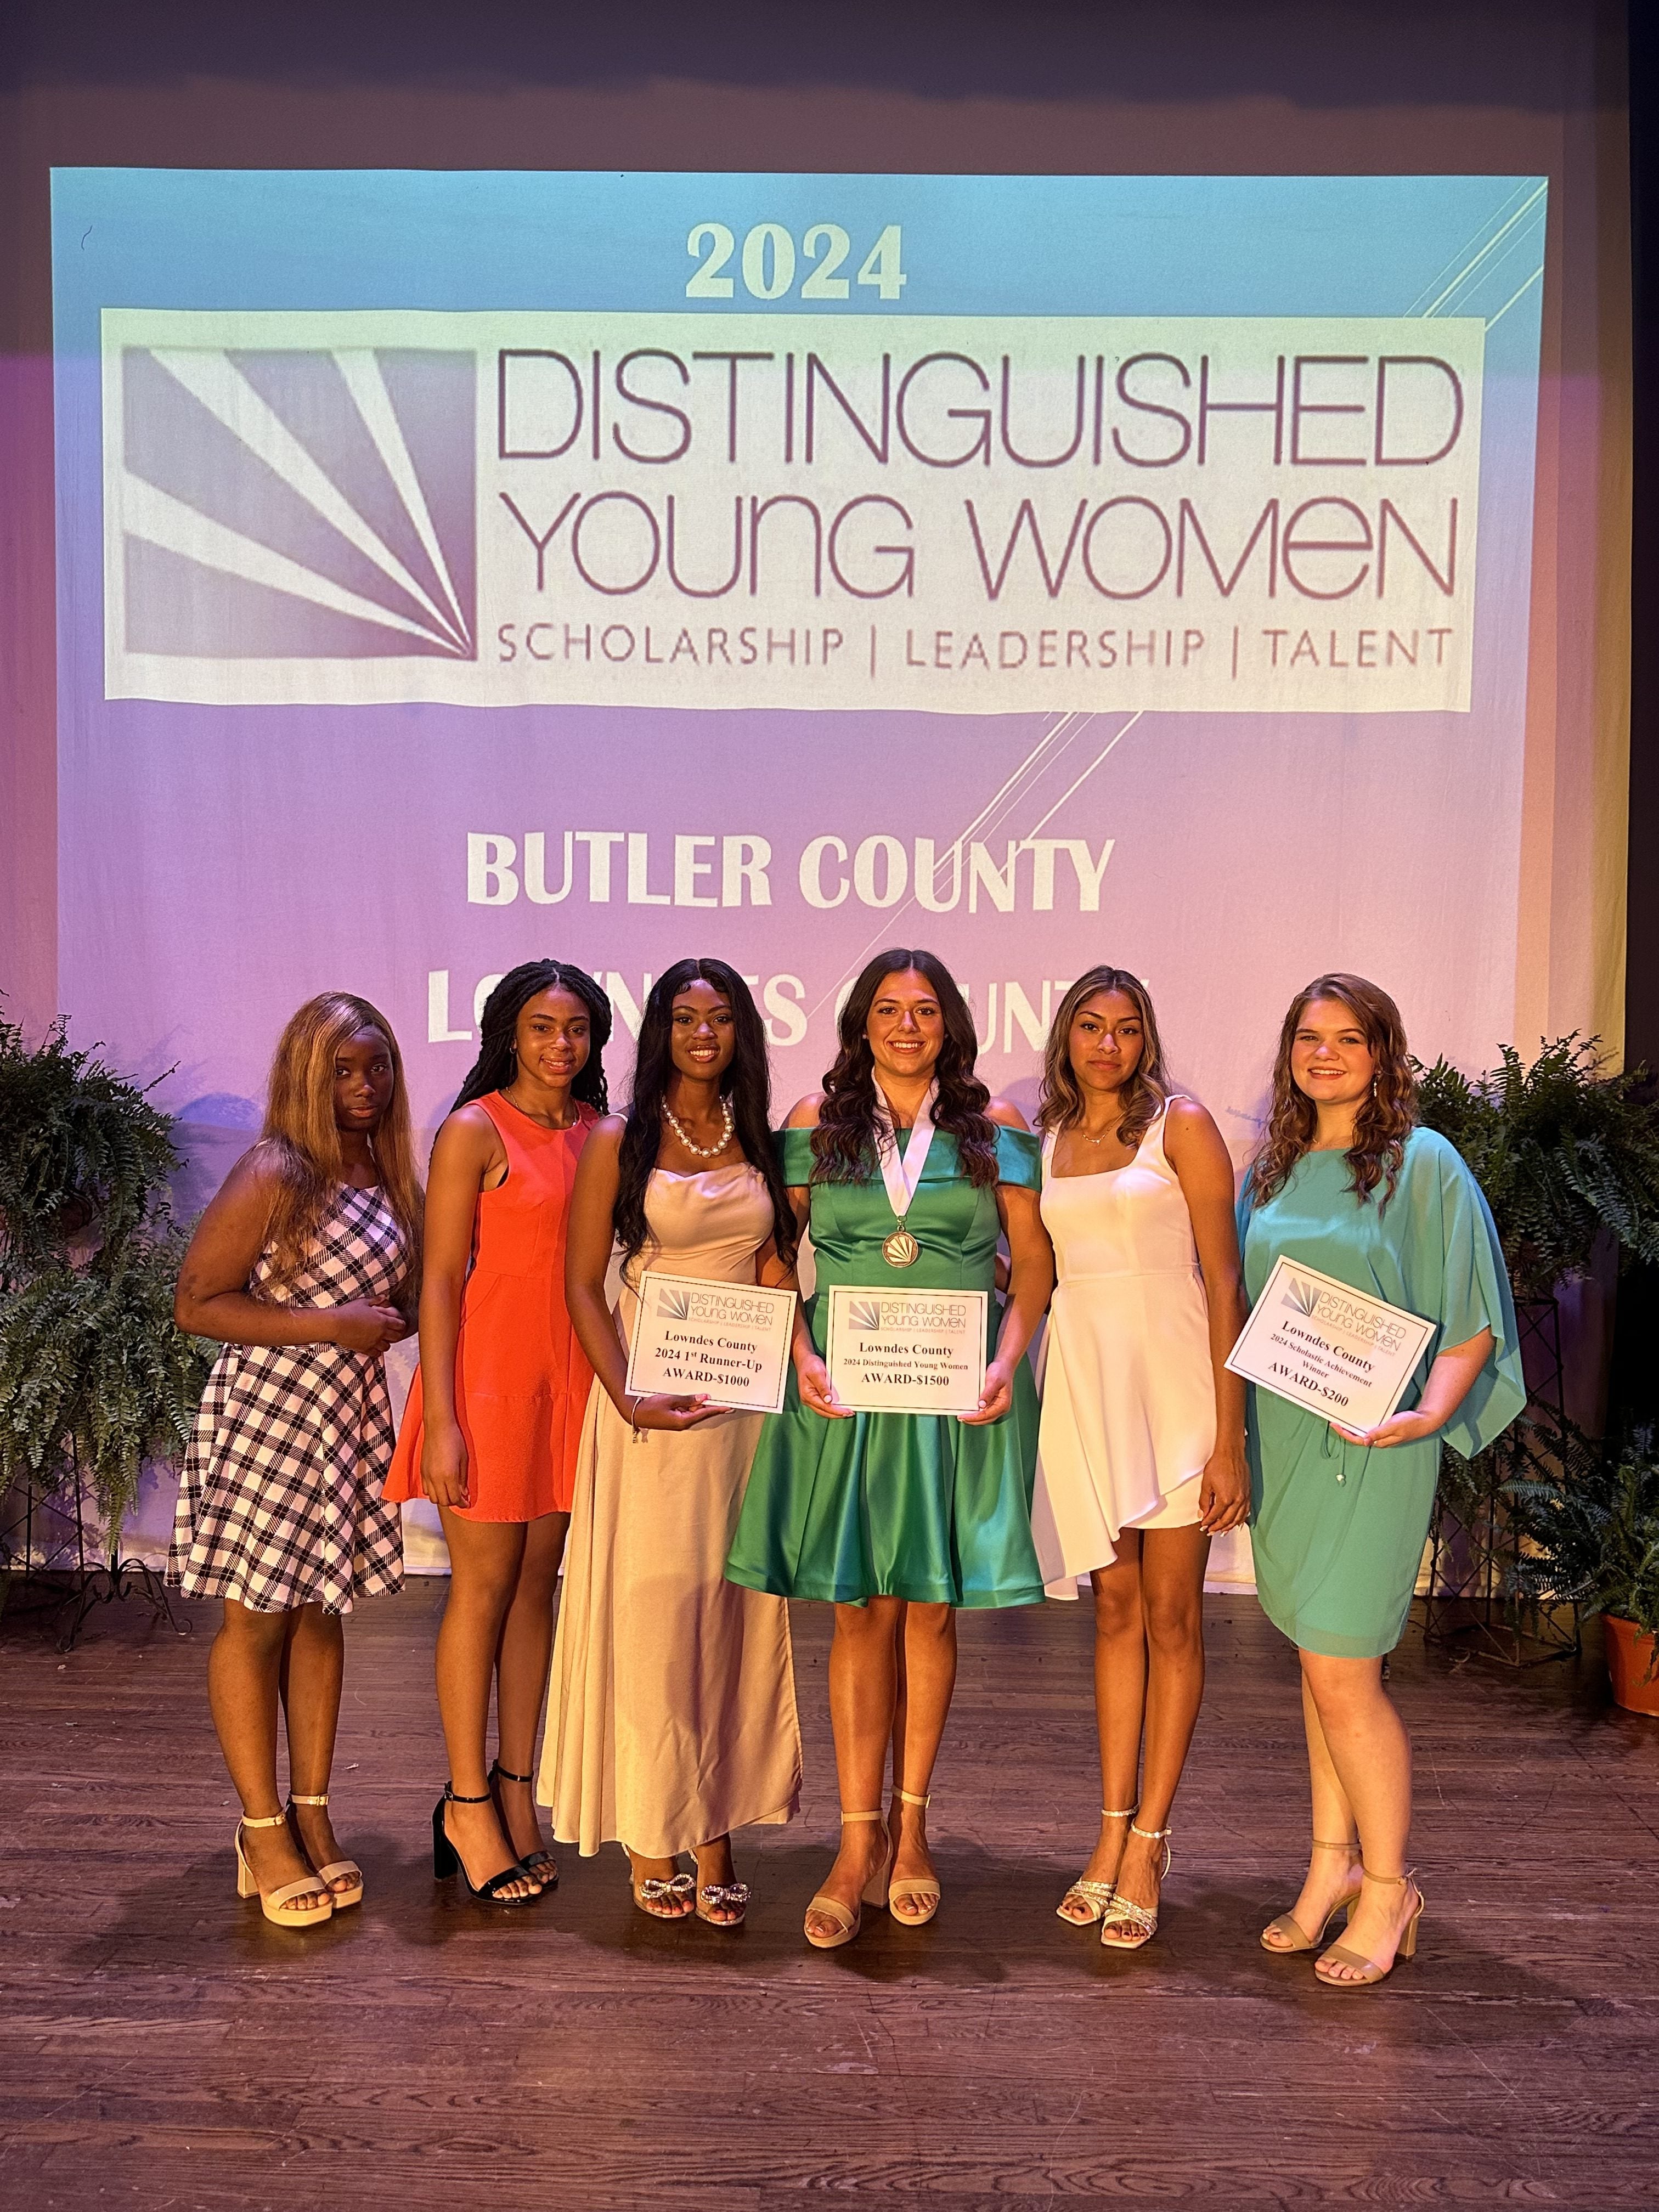 Distinguished Young Women Scholarship